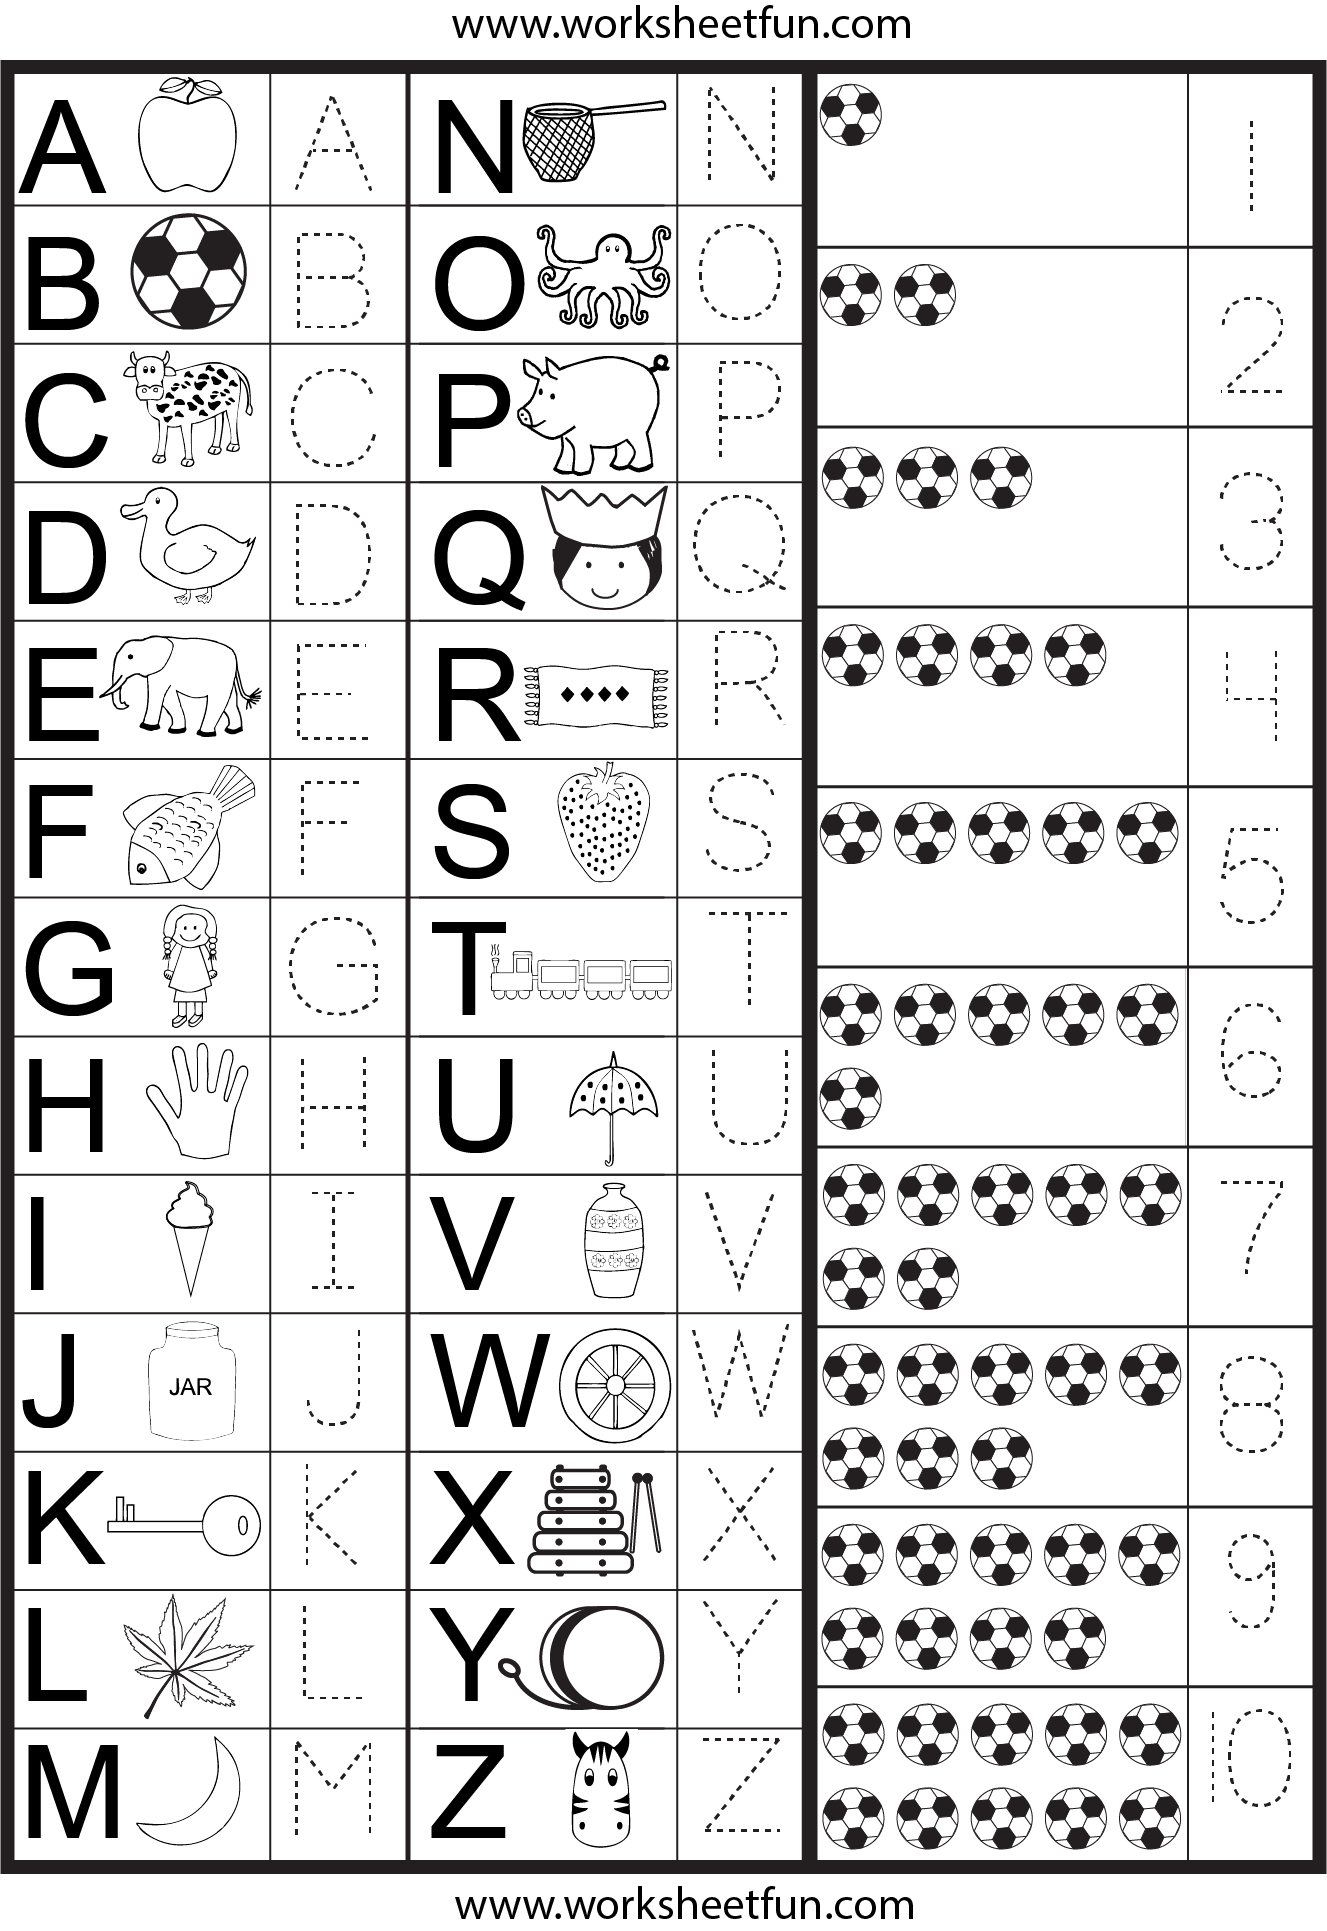 Kindergarten Practice With Letters And Numbers Worksheets